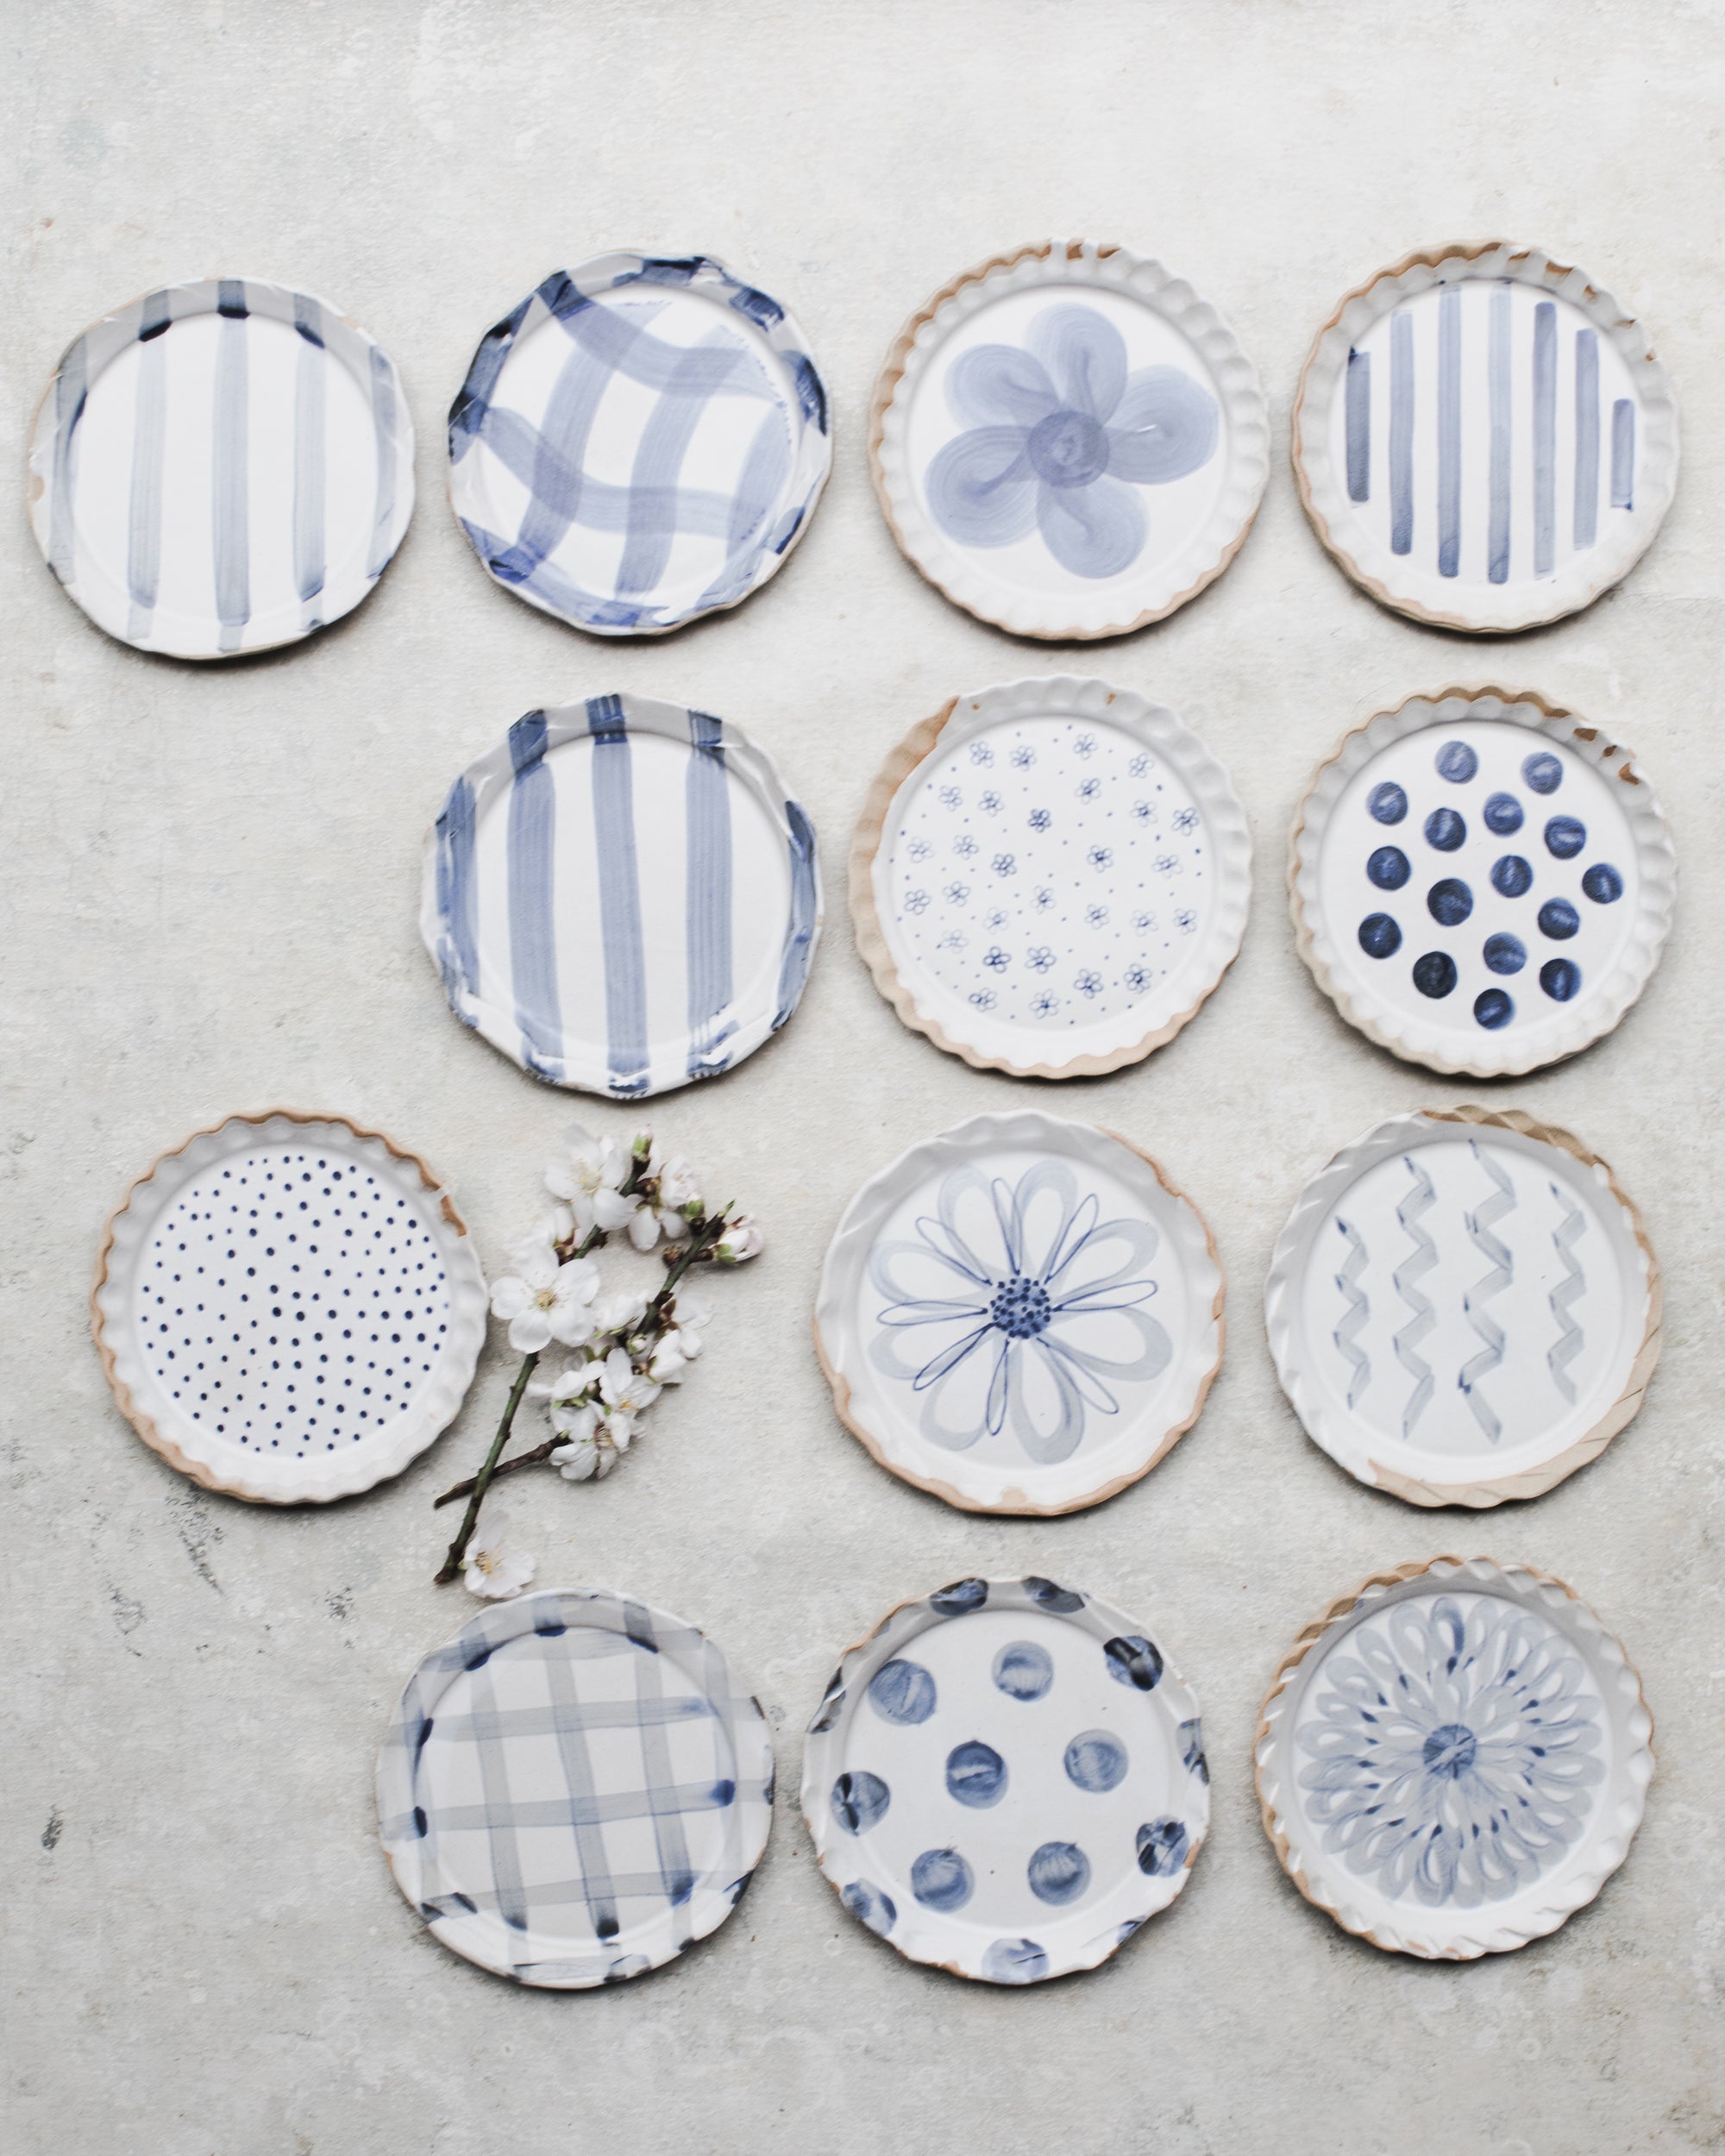 Handmade and painted ceramic cake plates in blue and white patterns 14cm by clay beehive ceramics